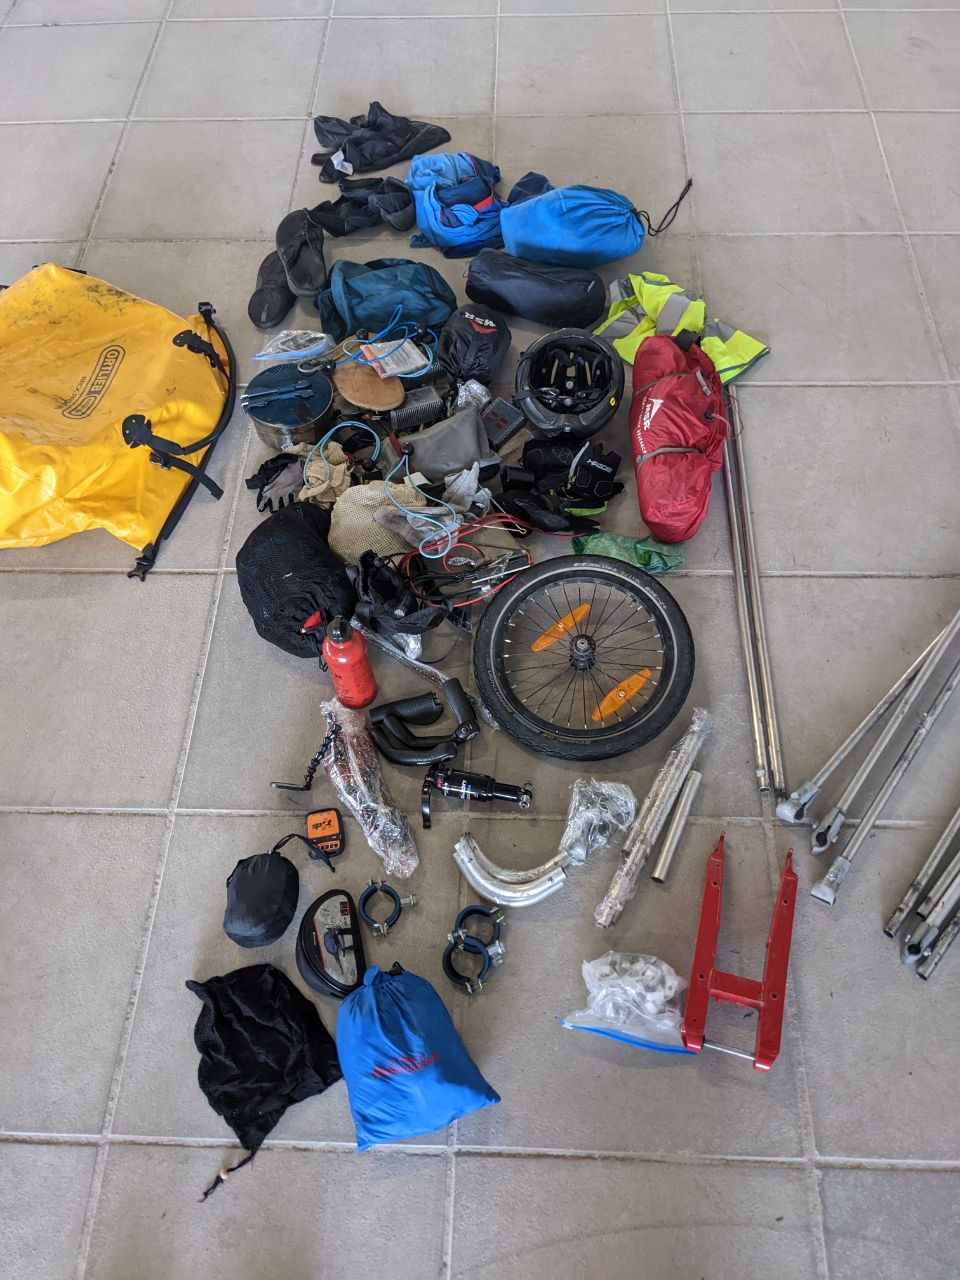 That is all the gear from a disassembled trailer. A lot of spare parts, tent and sleeping bag, cooking equipment etc. As a comparison the blue bag top right is all the cloth of Johannes.